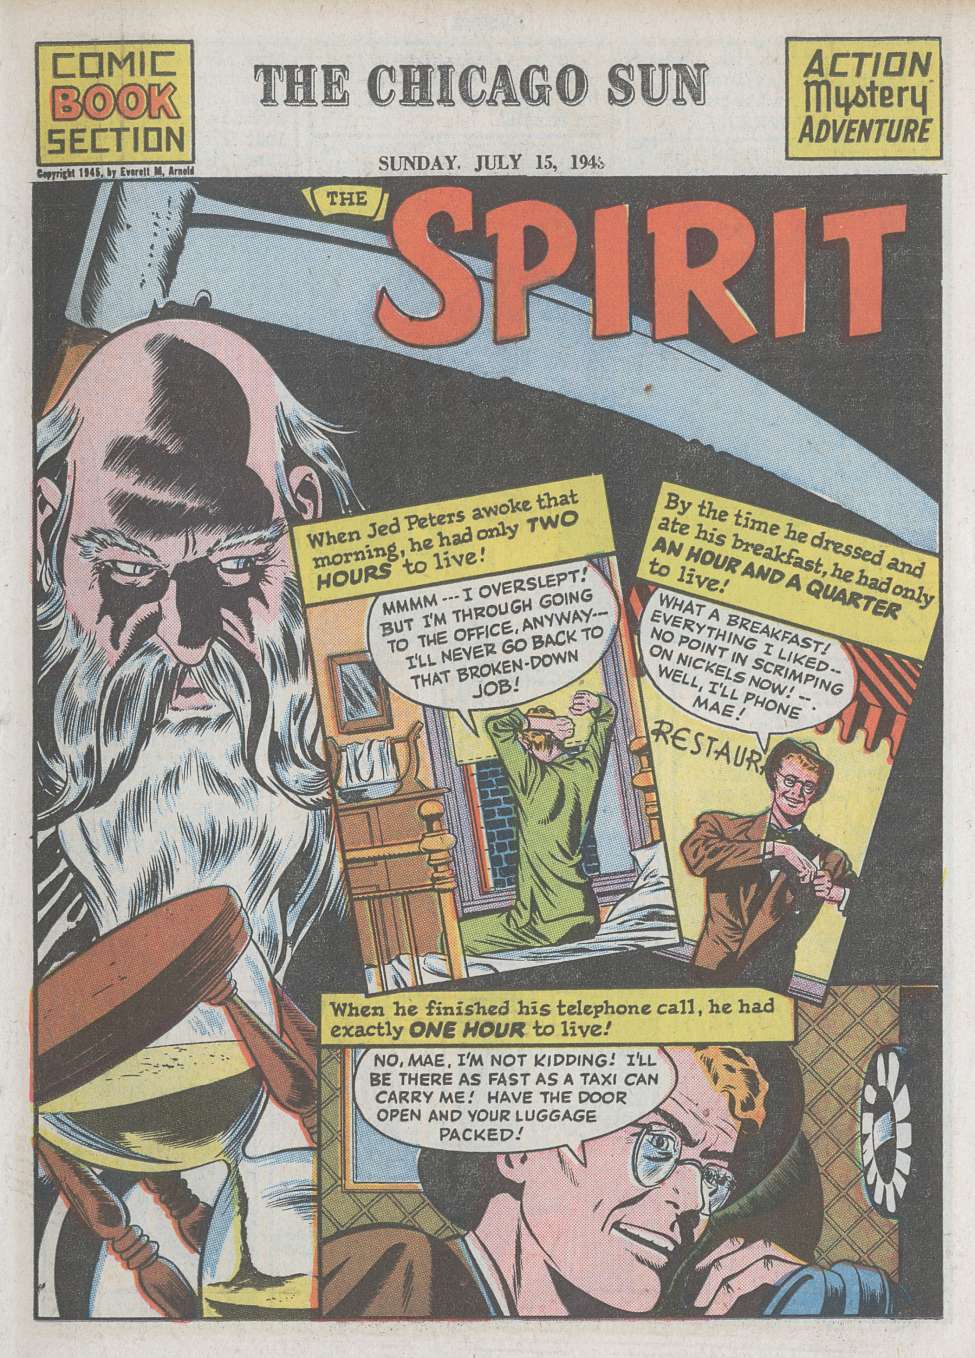 Comic Book Cover For The Spirit (1945-07-15) - Chicago Sun - Version 1